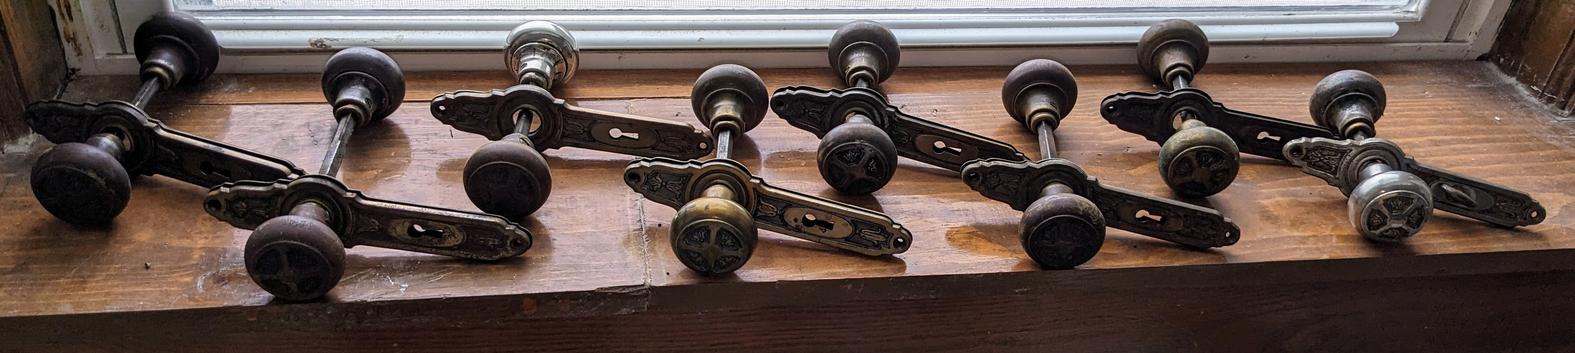 Ornate Antique Metal Door Knobs and Plates